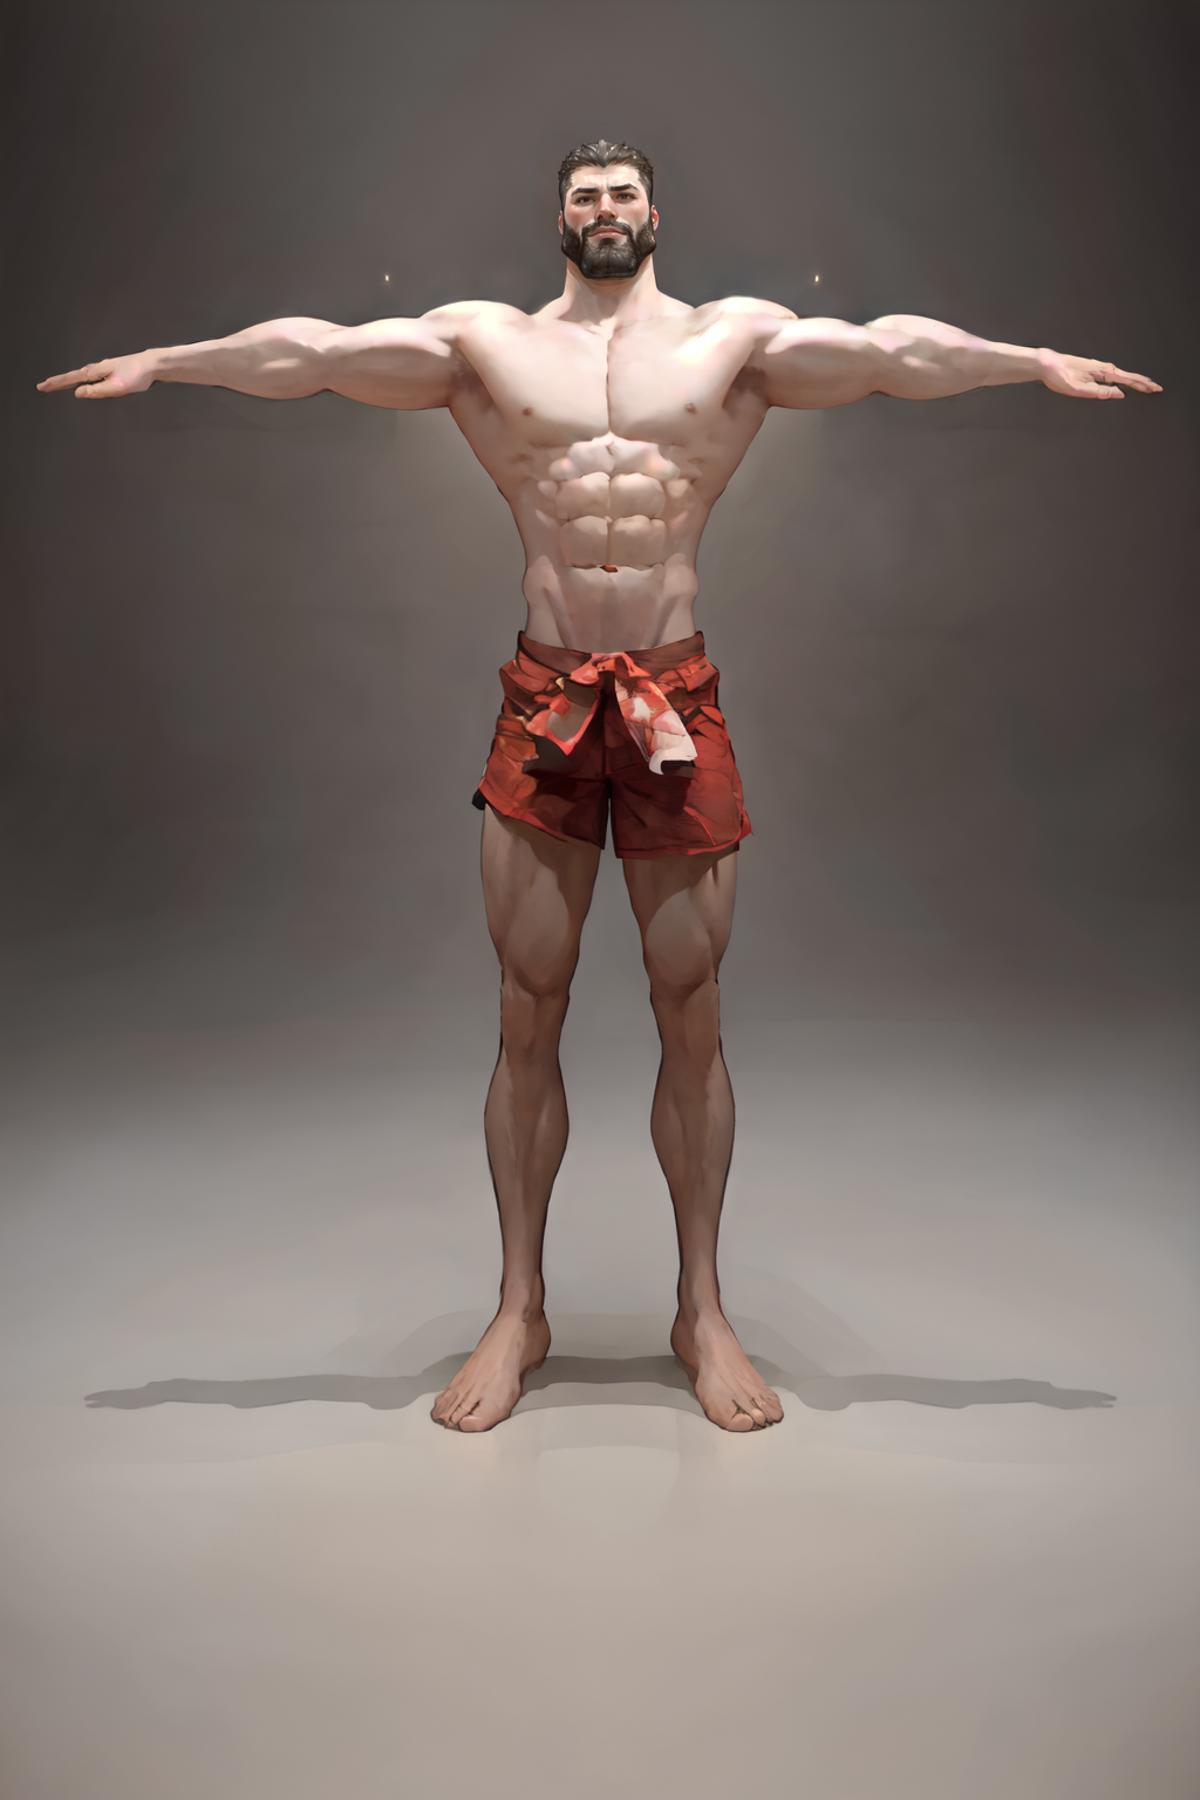 A 3D model of a muscular man with a red shorts and white shirt.